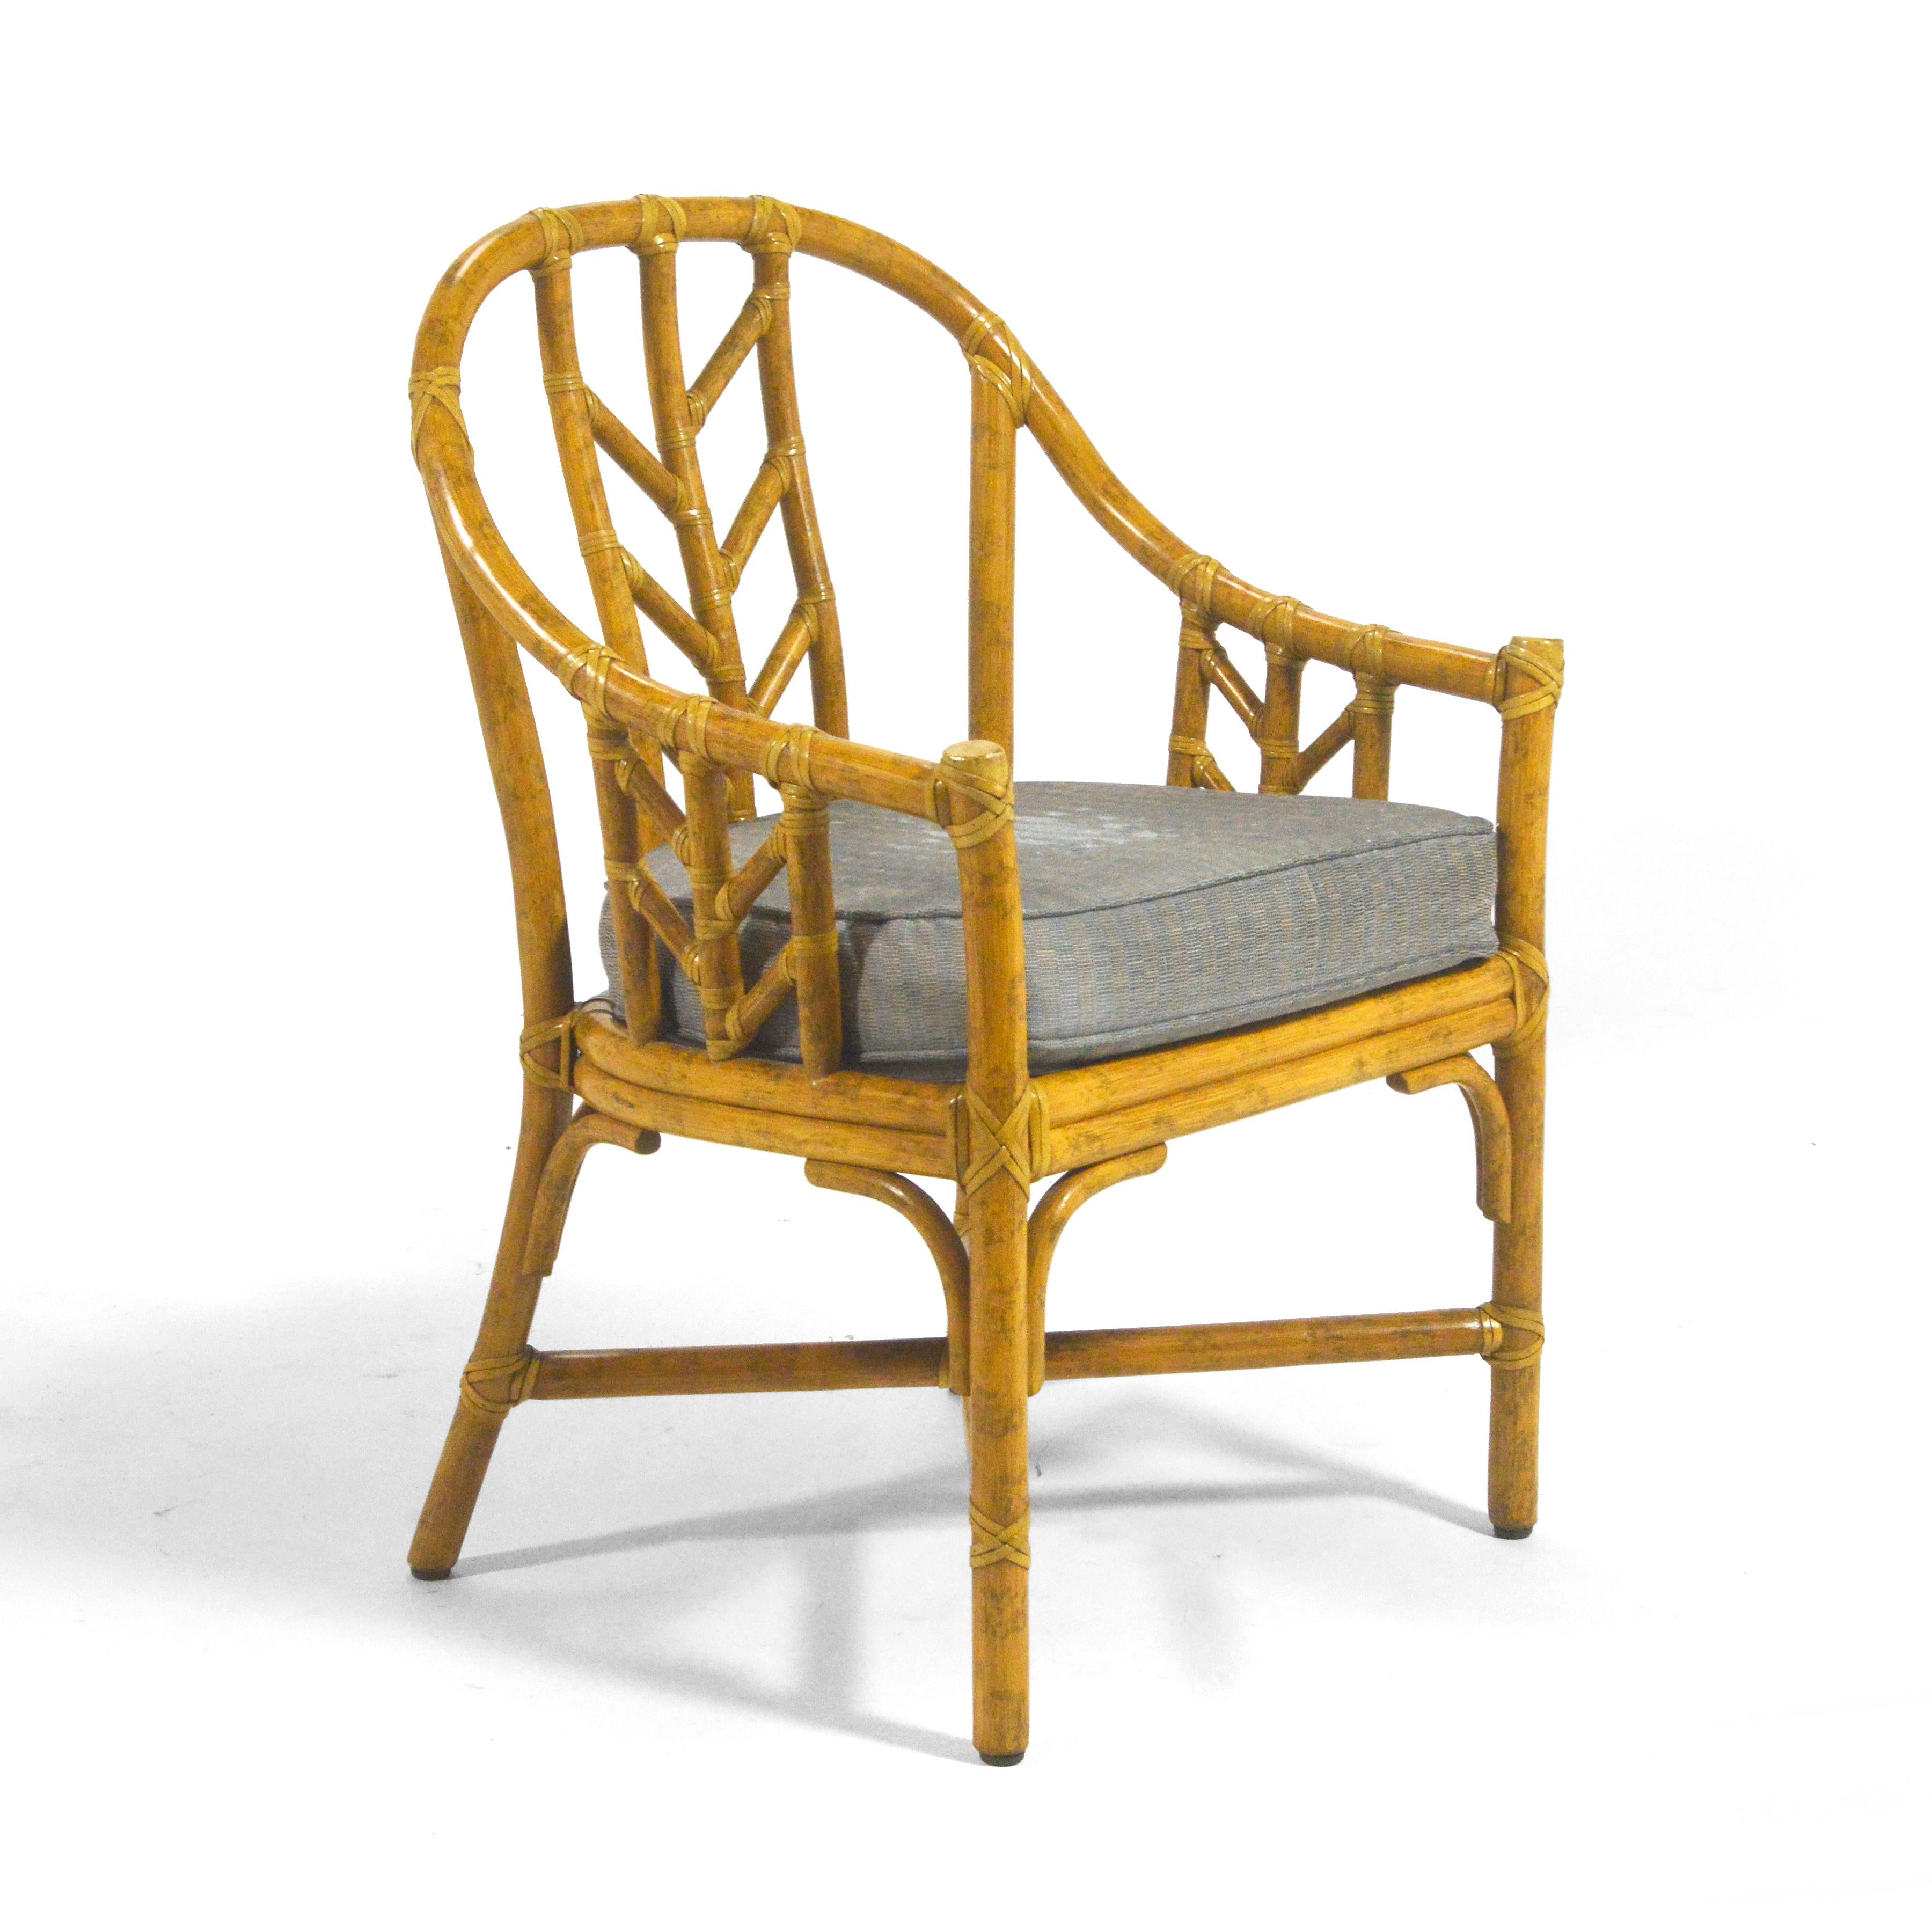 Elinor McGuire designed this model M-71 occasional chair for McGuire of San Fransisco, the company she started with her husband John. McGuire furniture is made to last for generations. Not only is the California organic modern design tasteful and